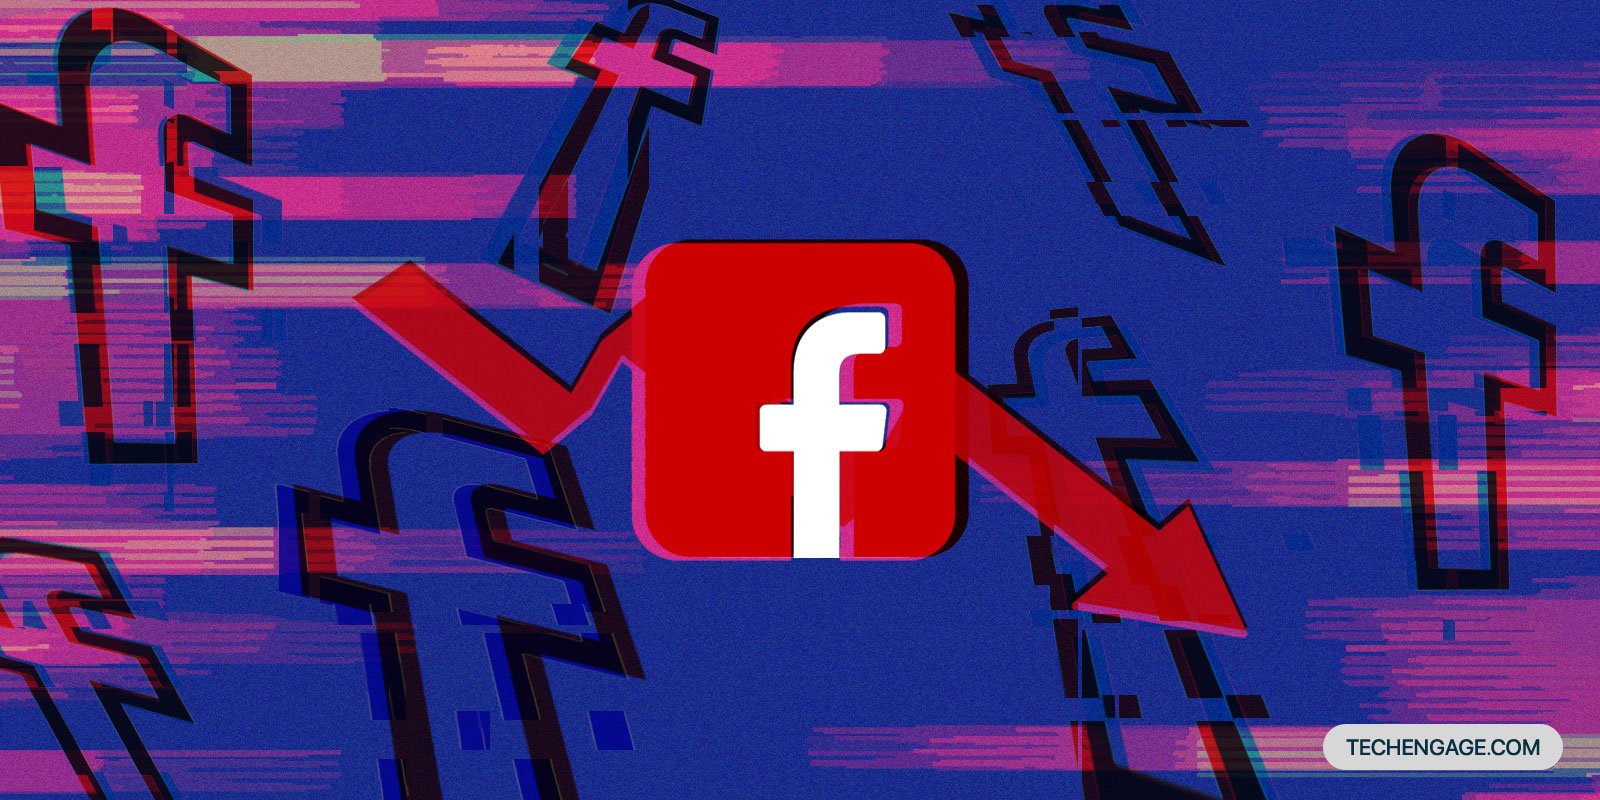 Facebook Is Losing Its Daily Online Users Plunging Revenues Of $230 Billion